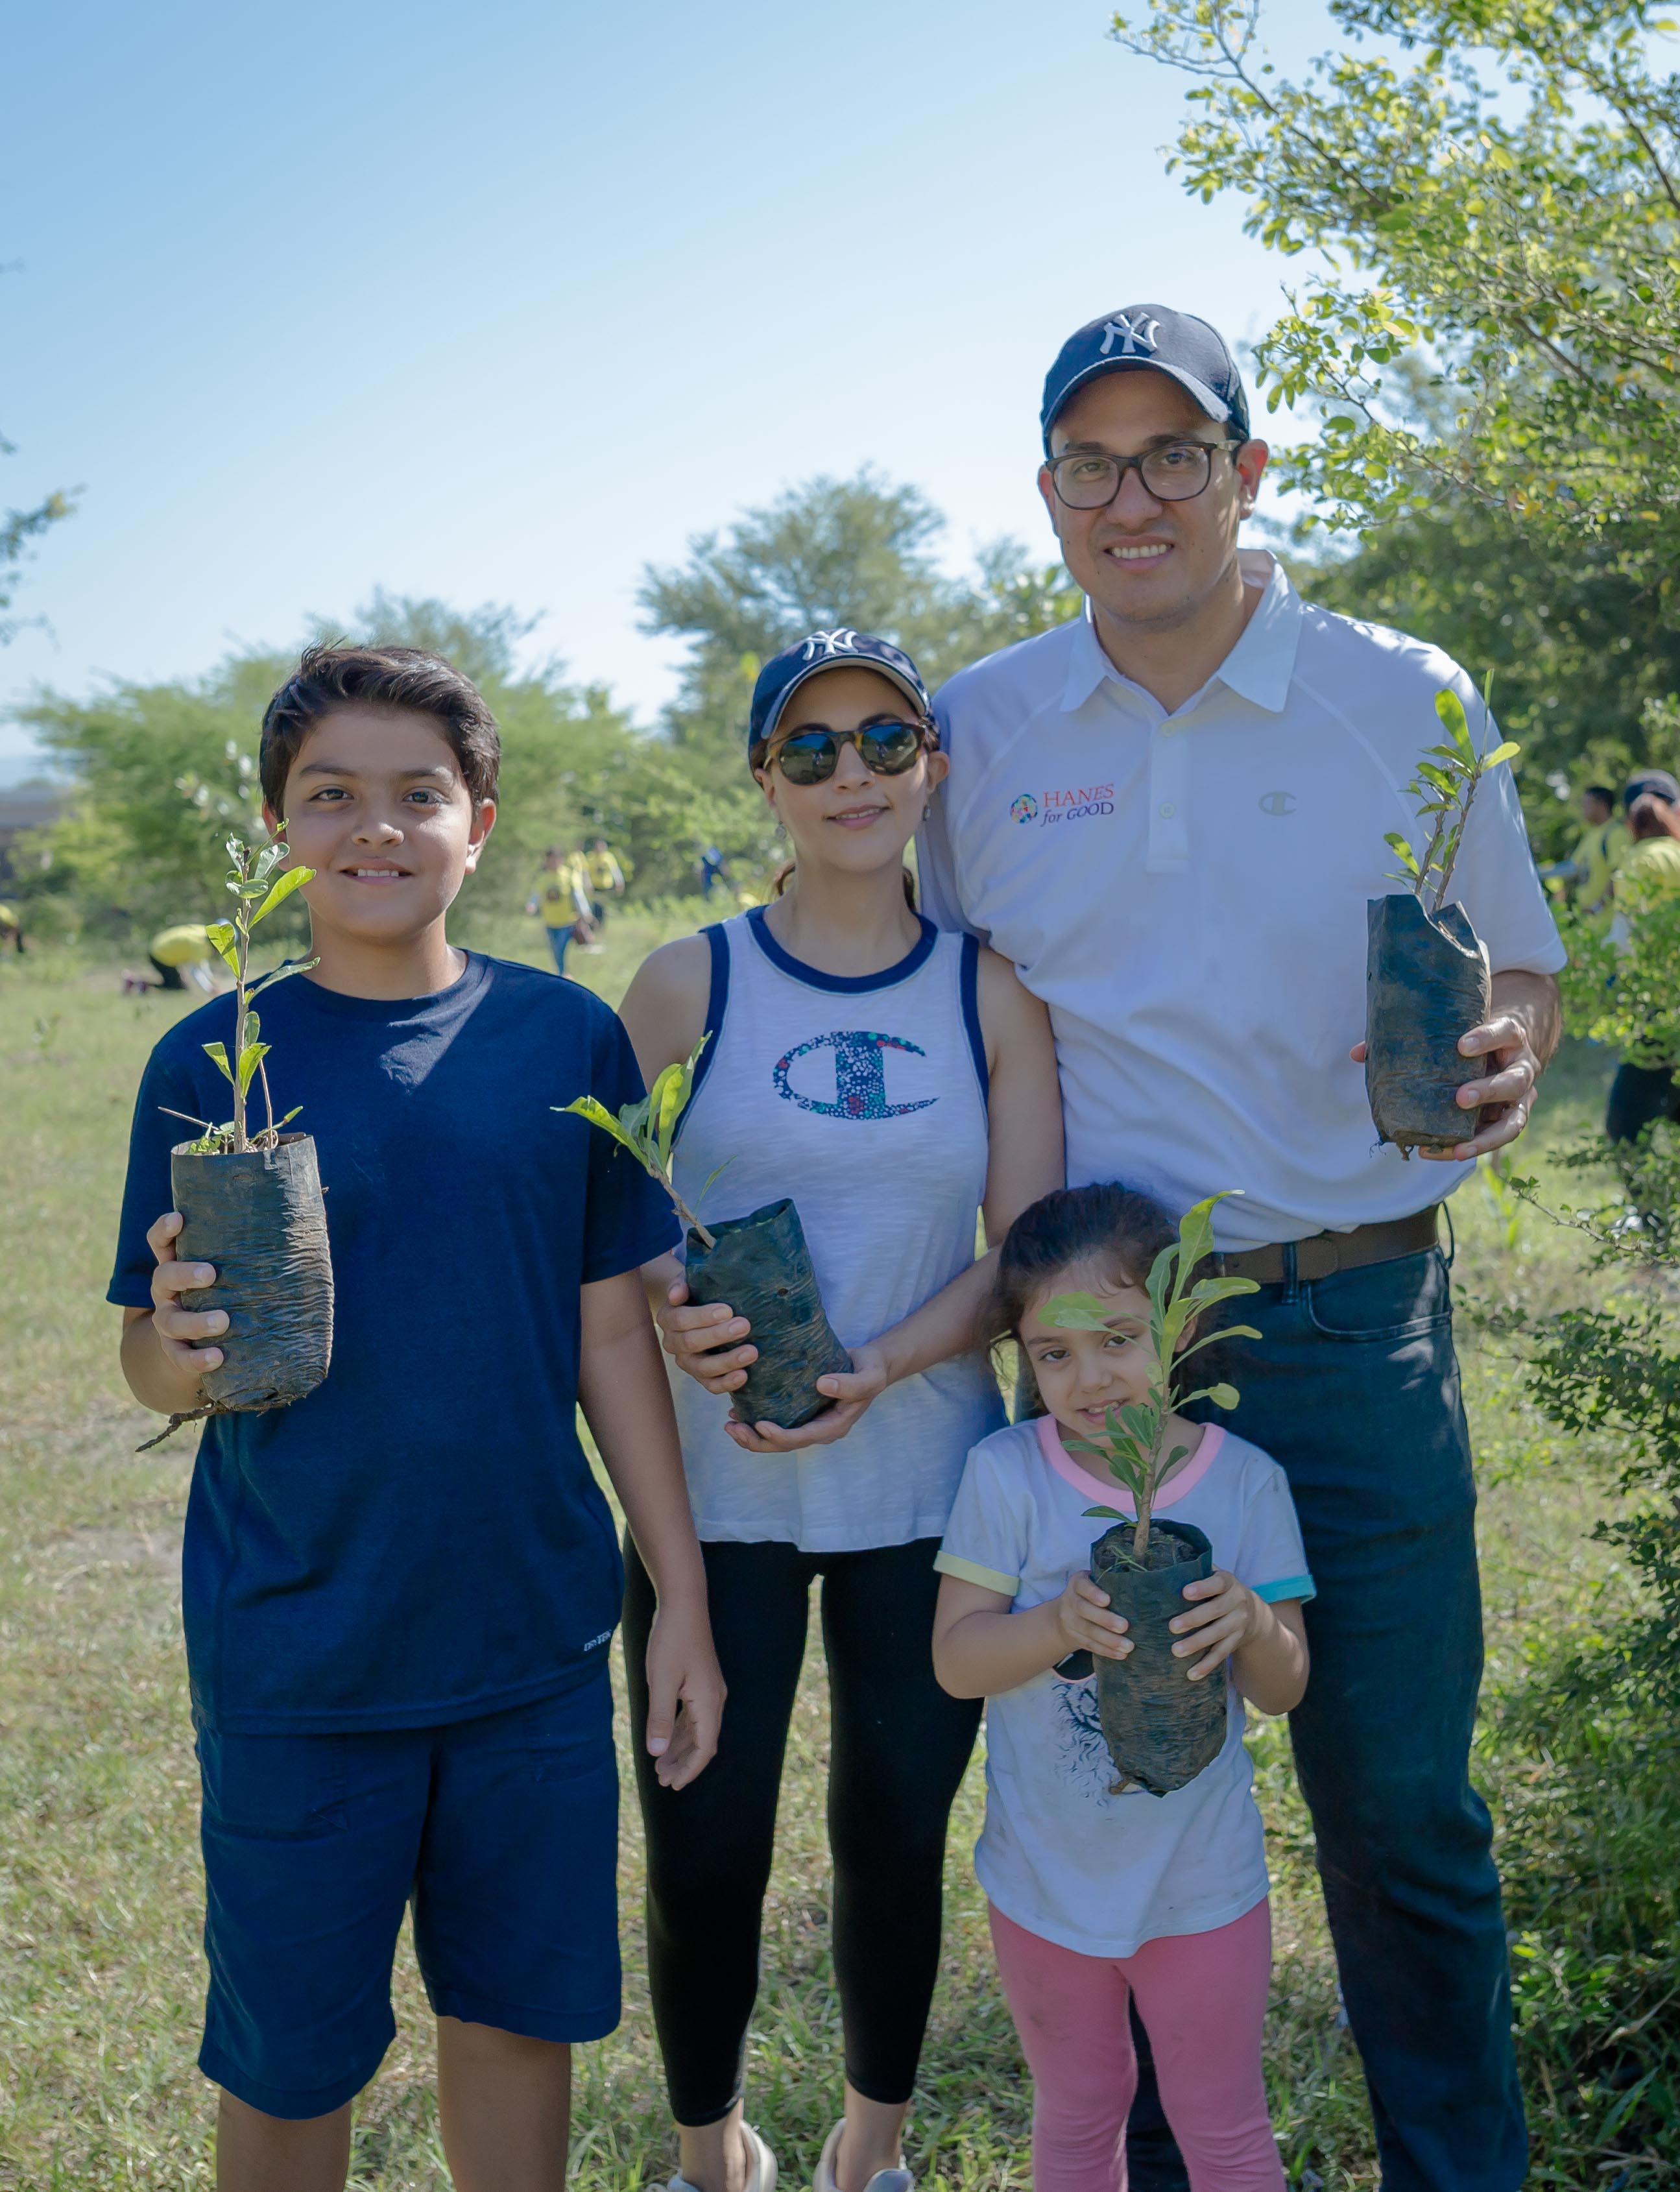 Teddy Mendoza, Director of Global Sustainability and EHS at HanesBrands, Inc. and his family